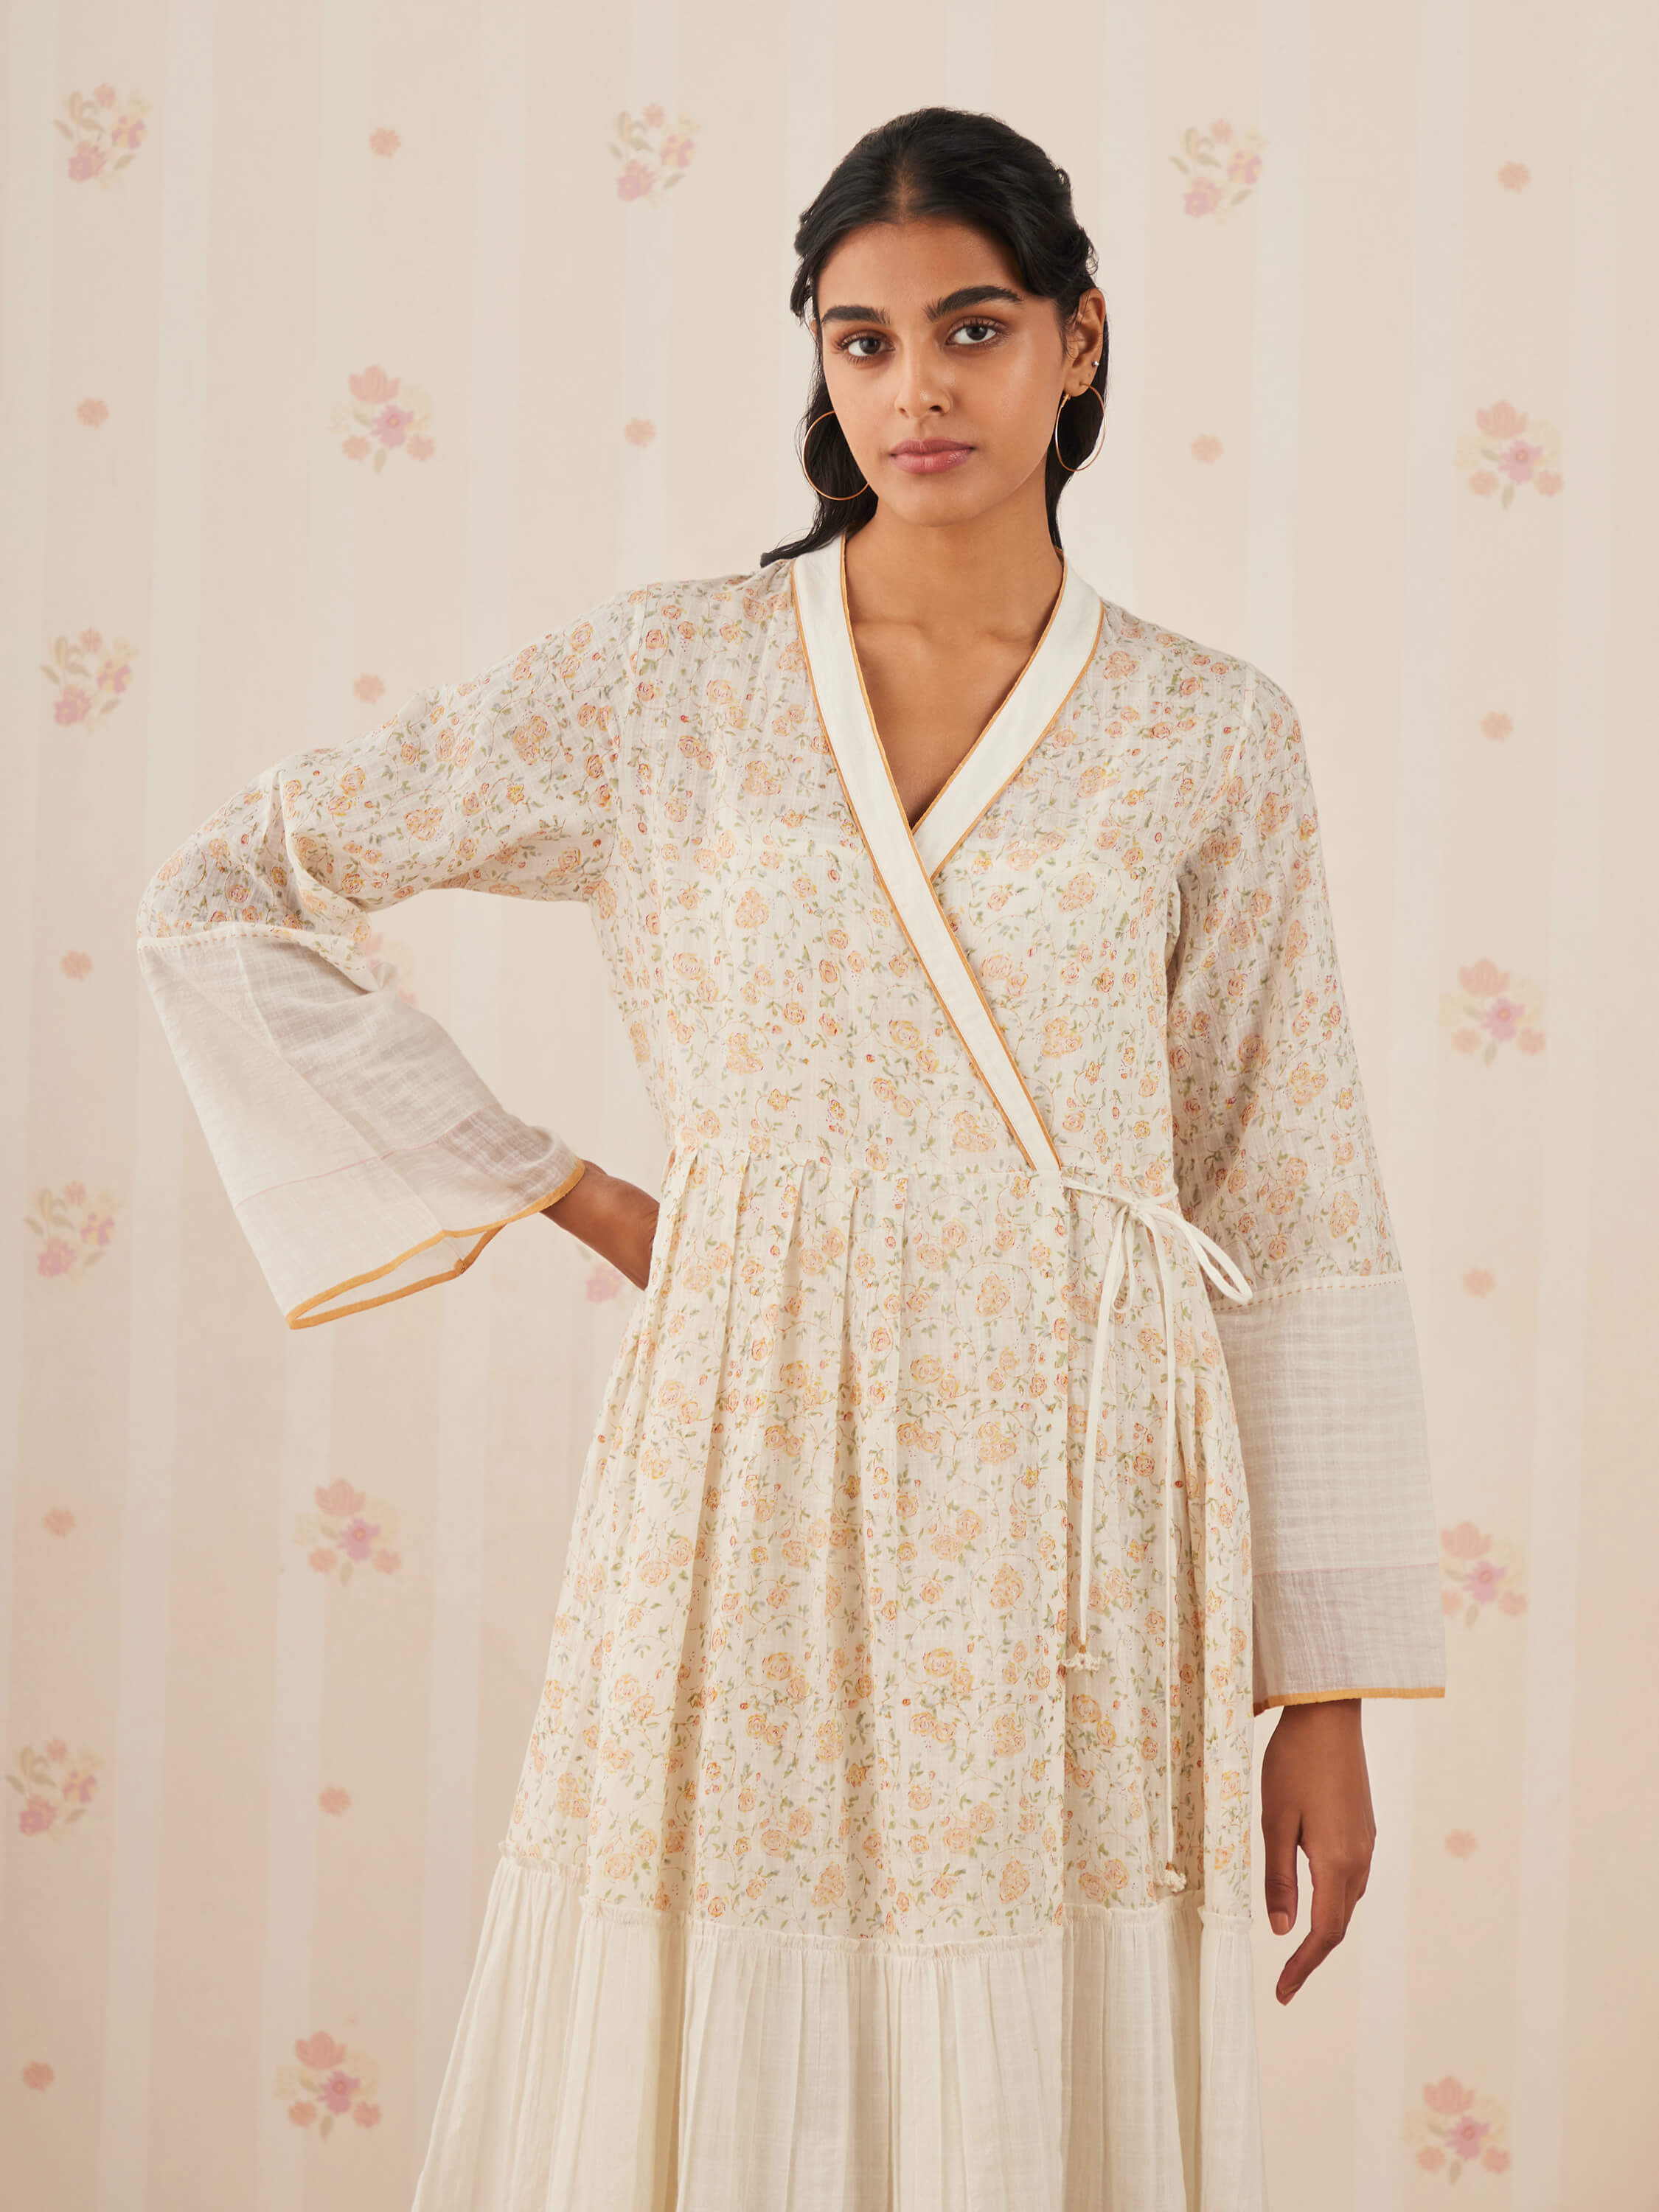 Women's floral print wrap dress with long sleeves in soft hues